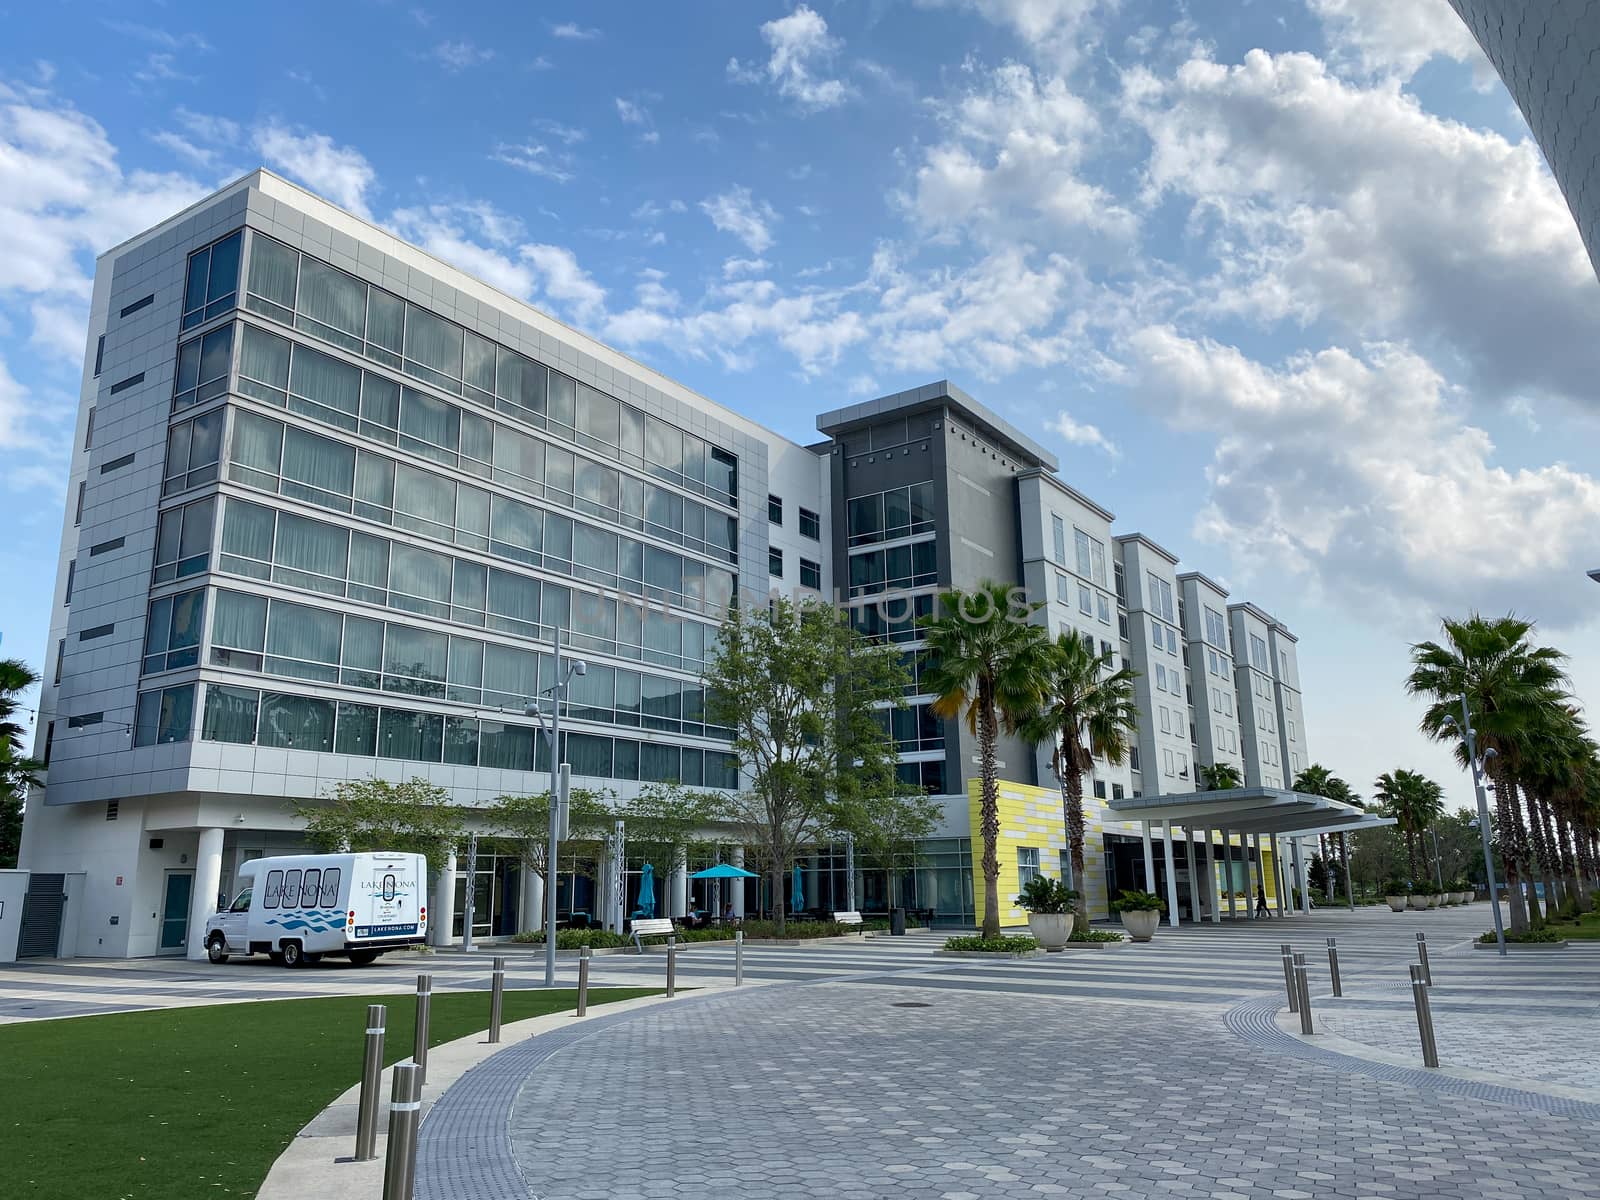 Orlando, FL/USA-4/10/20:  The exterior of a Marriott Courtyard and Residence Inn in Laureate Park Lake Nona Town Center in Orlando, Florida.